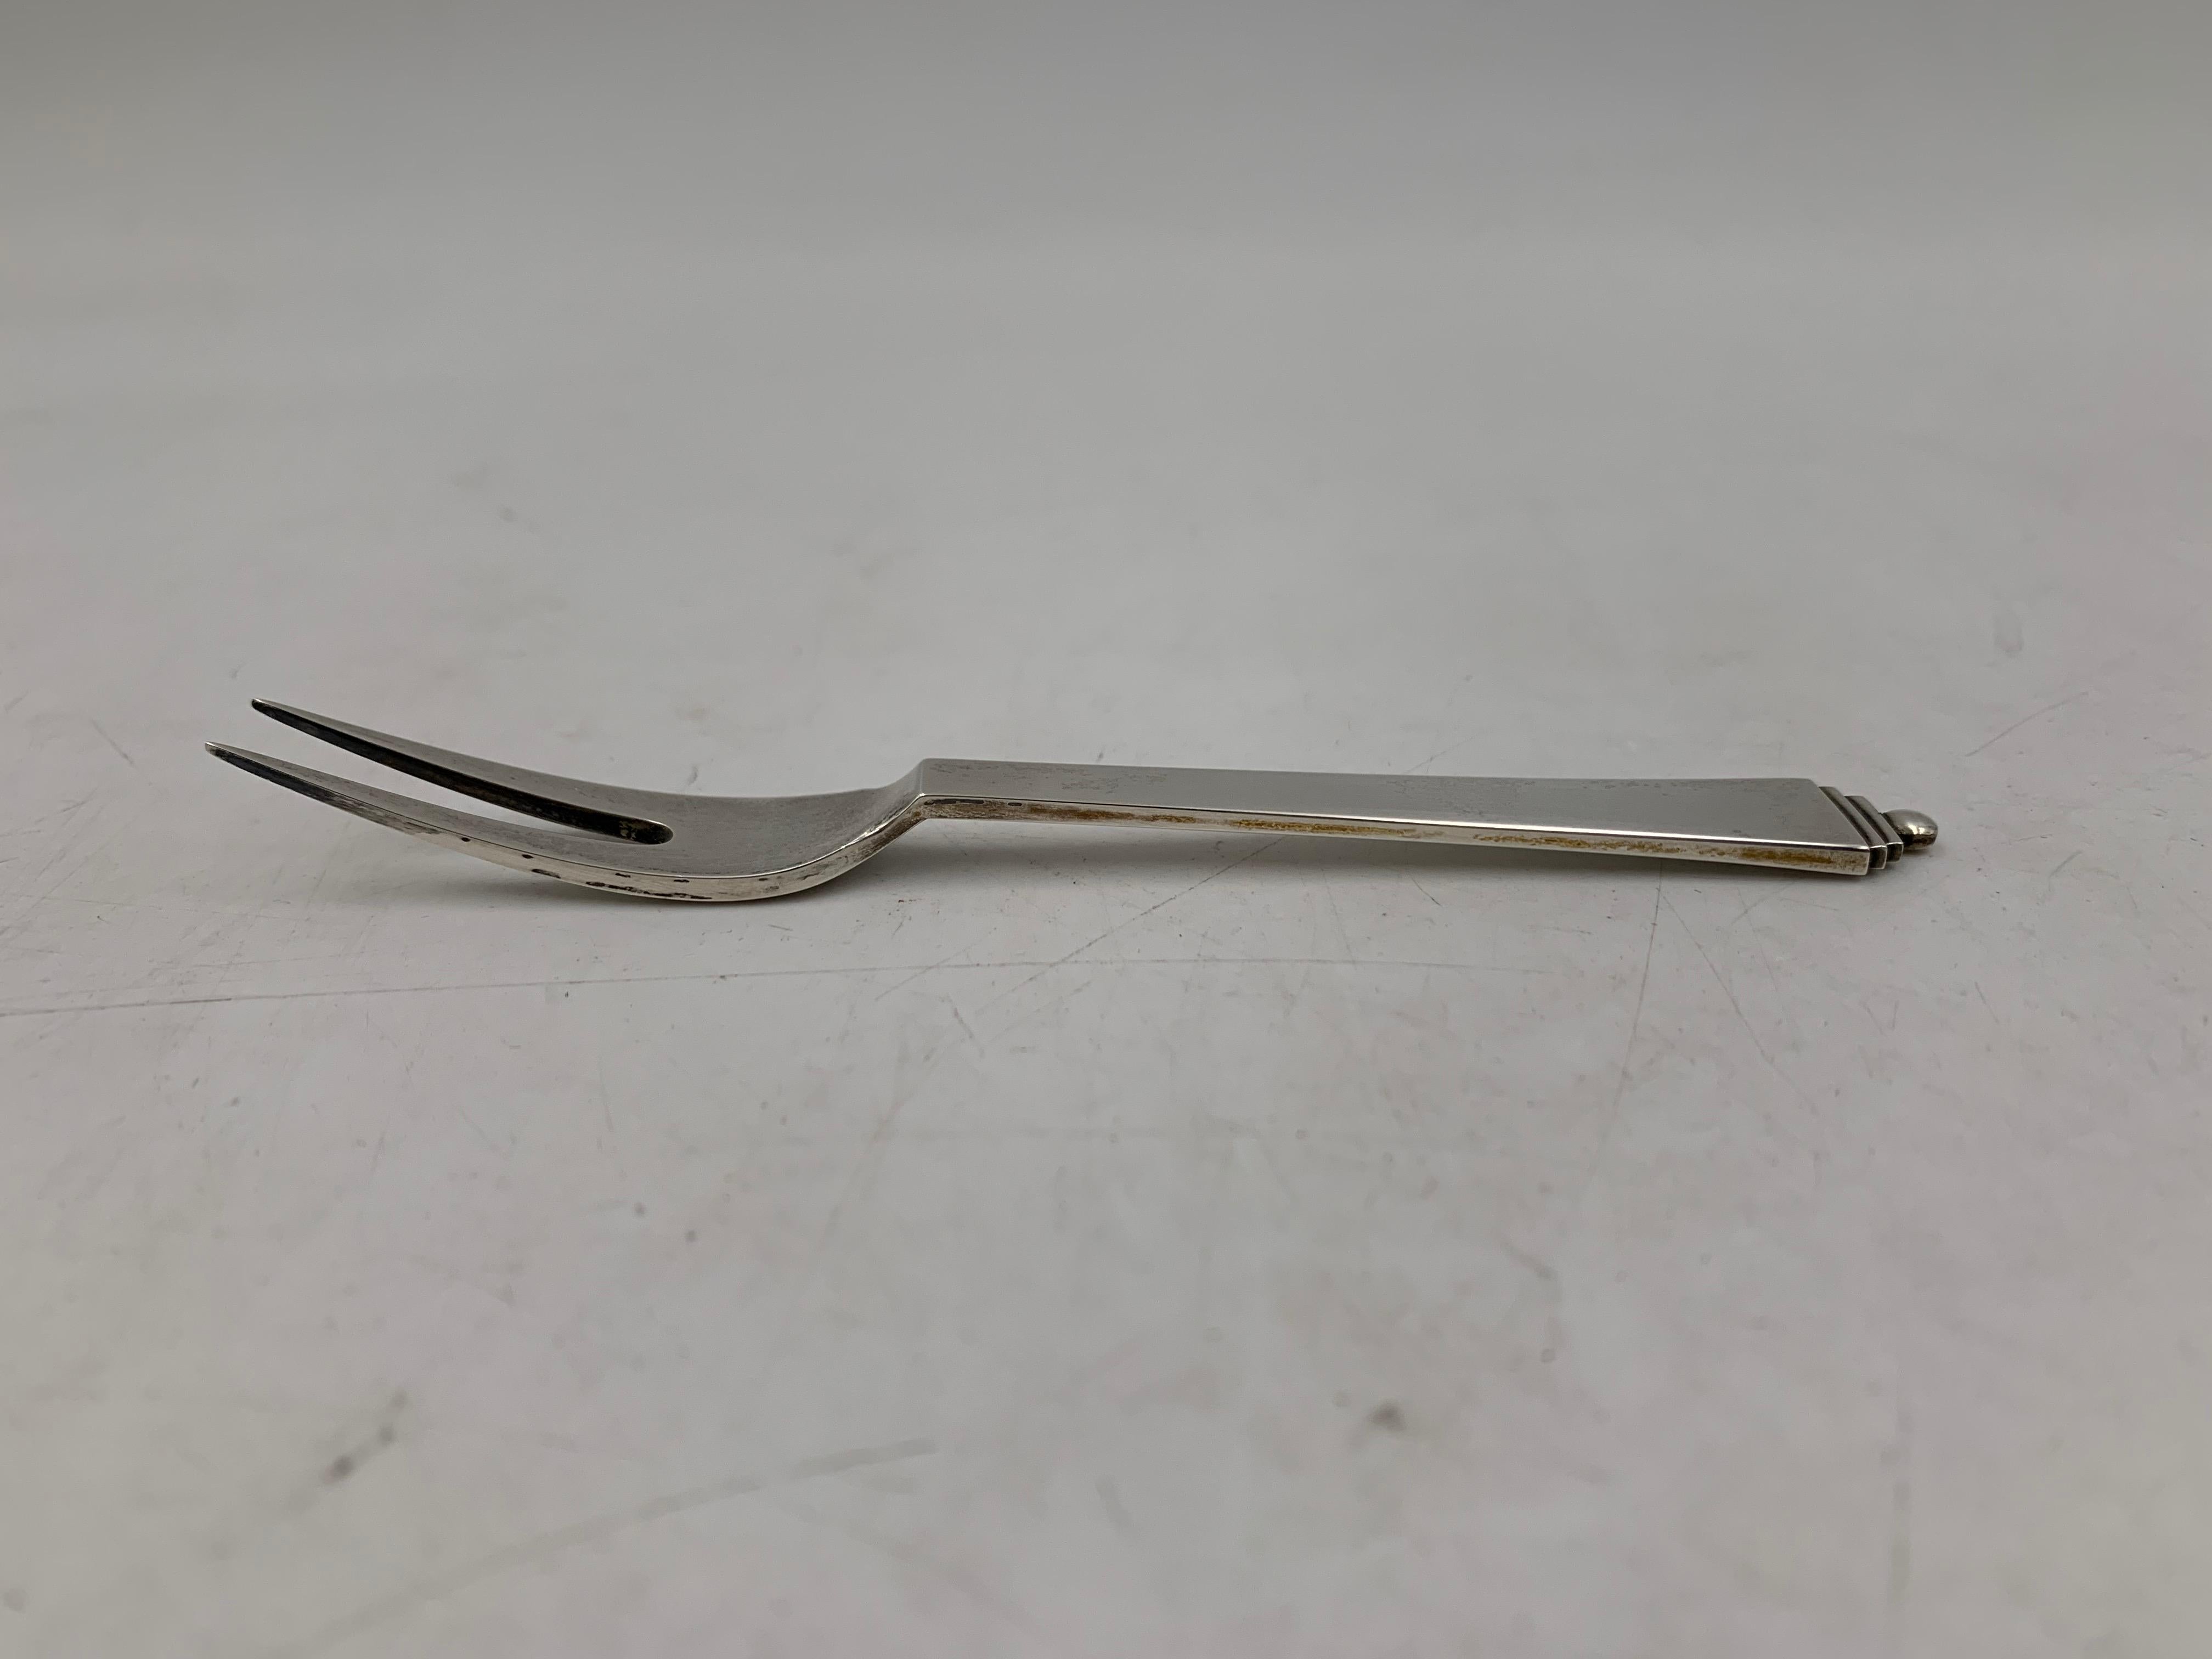 Georg Jensen sterling silver bar lemon fork in renowned Pyramid pattern. It measures 4 1/2'' in length by 1/3'' in width at the widest point and bears hallmarks as shown. 

Georg Jensen, a Danish silversmith, set up his own silver business in 1904